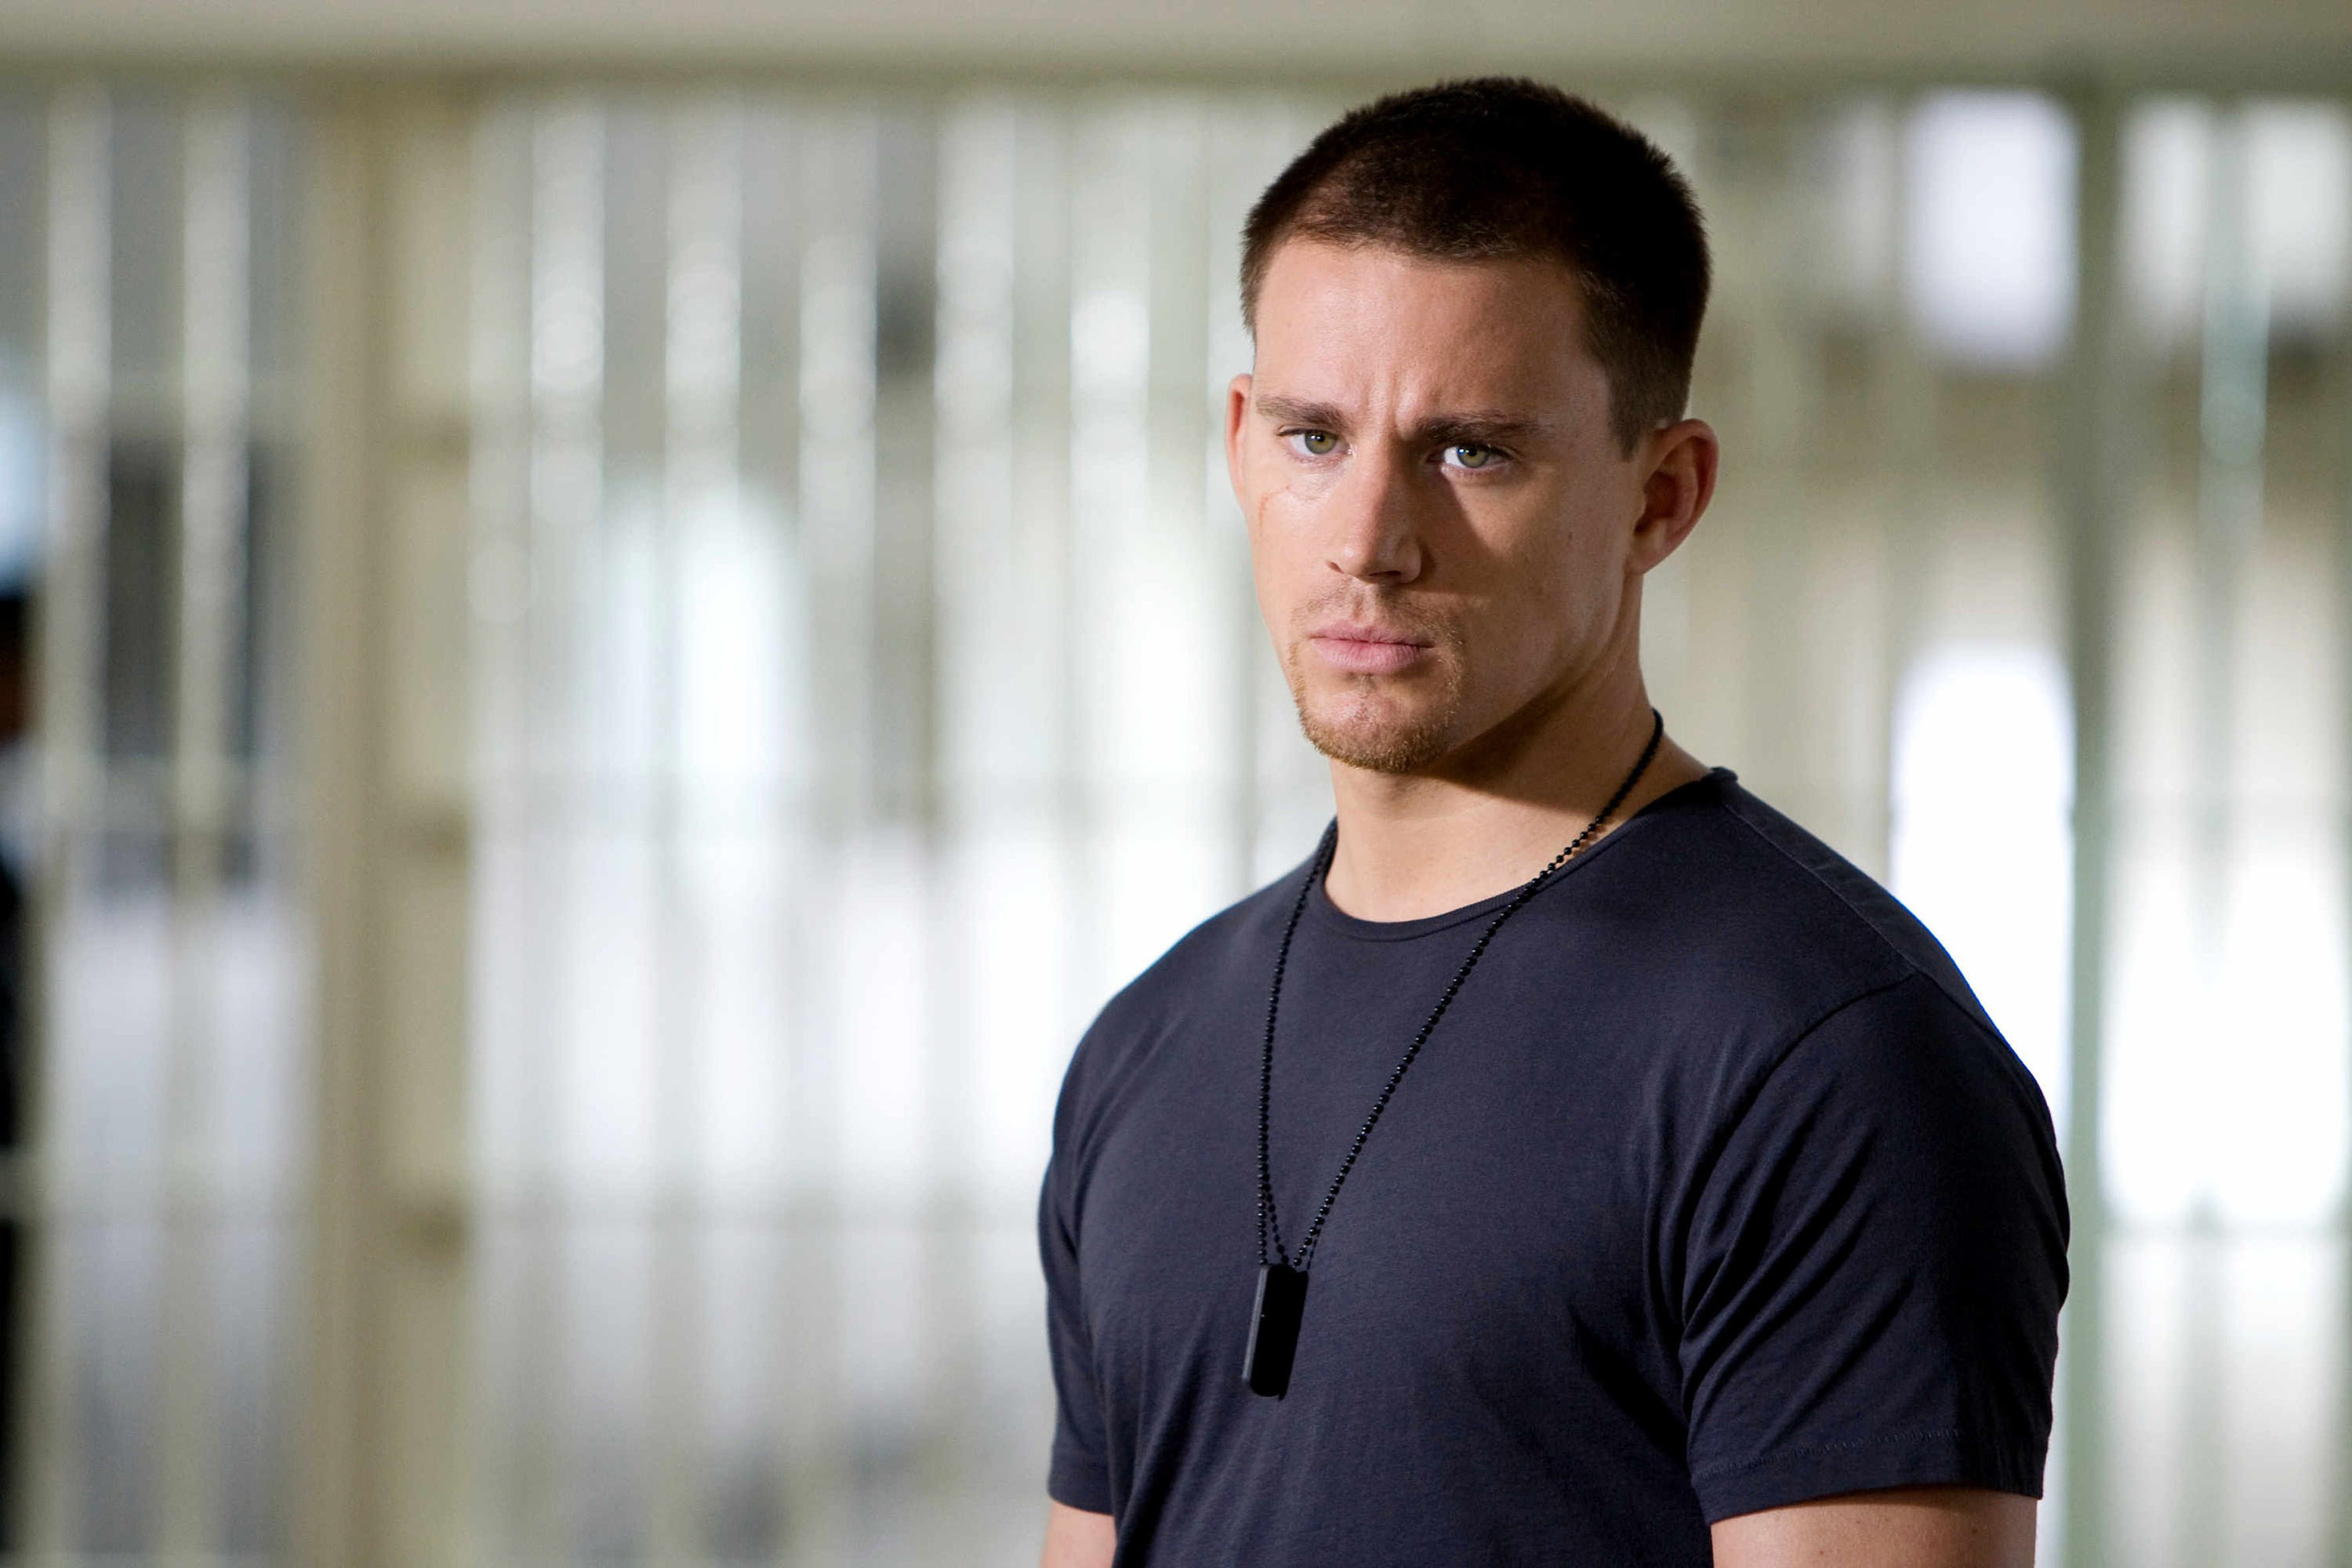 Channing Tatum, wearing dogtags, scowls in a prison cell